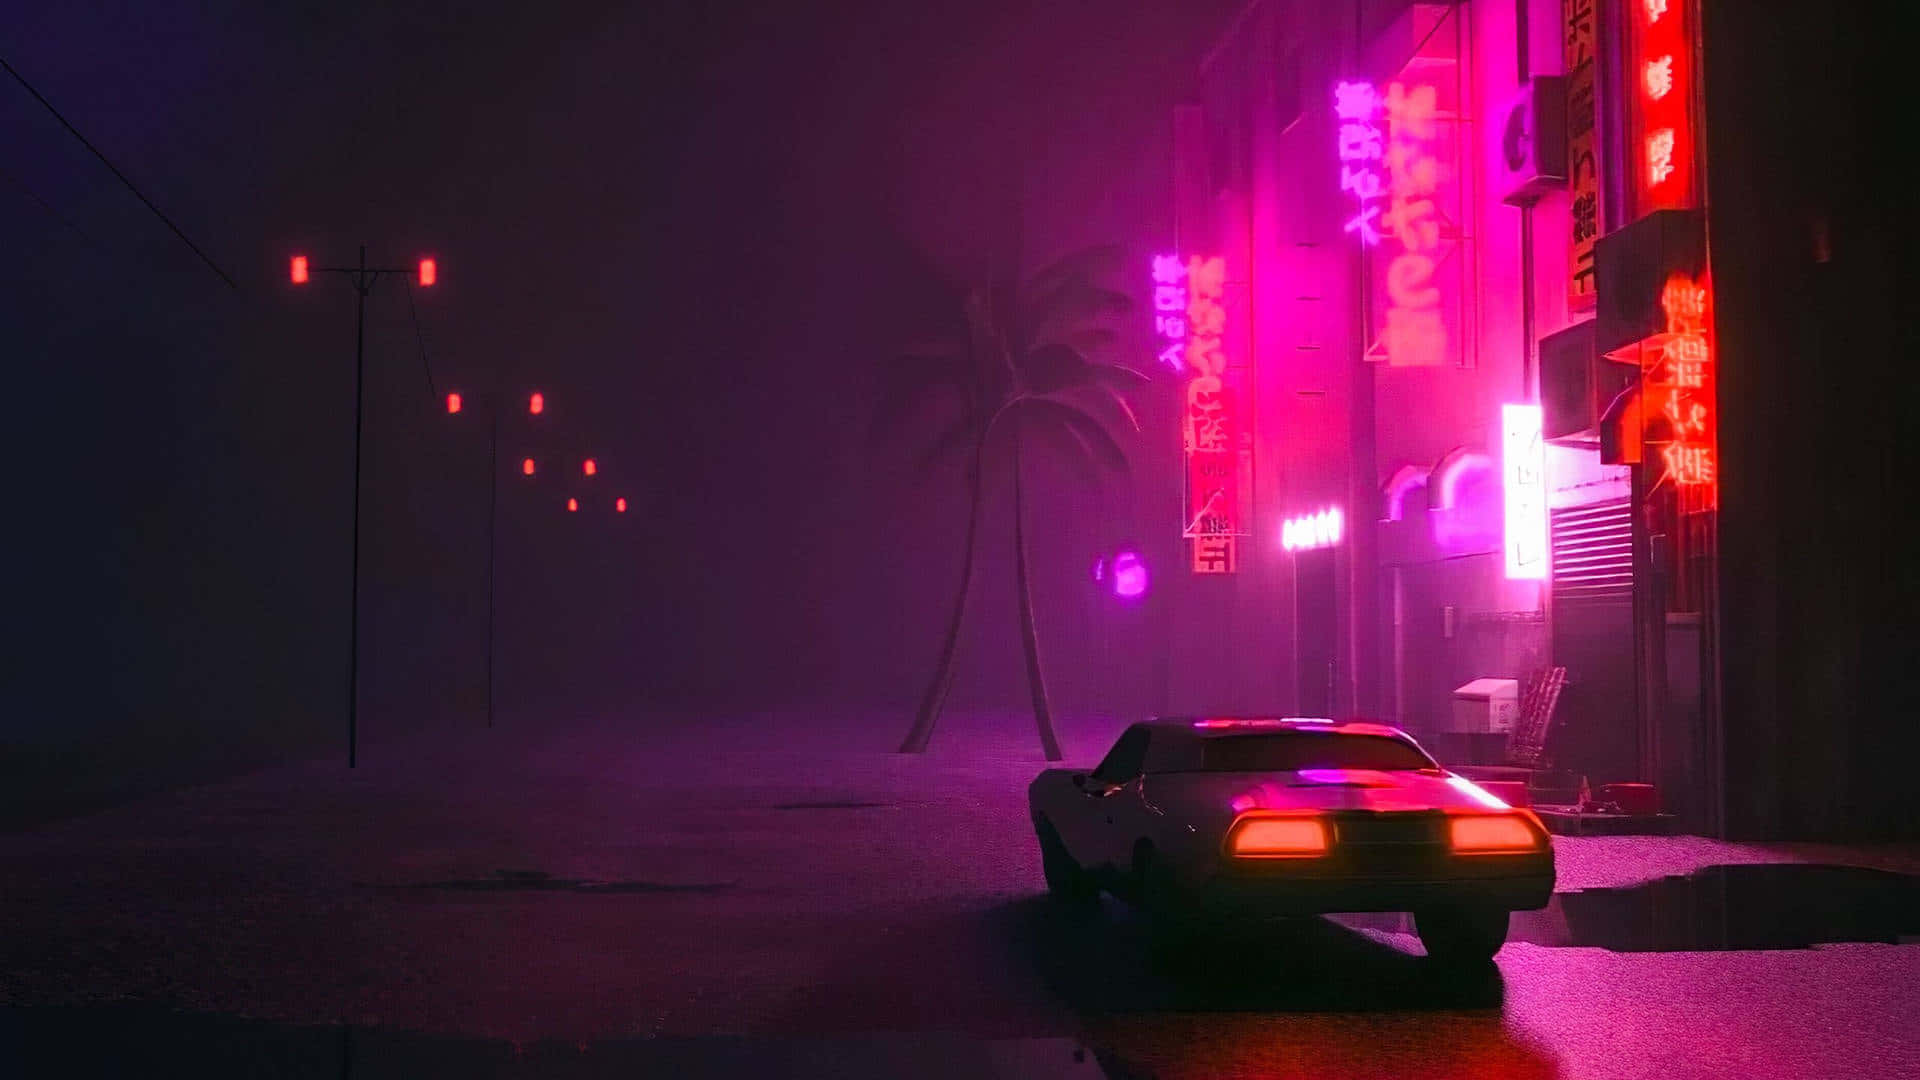 Discover the vibrancy of Synthwave City Wallpaper